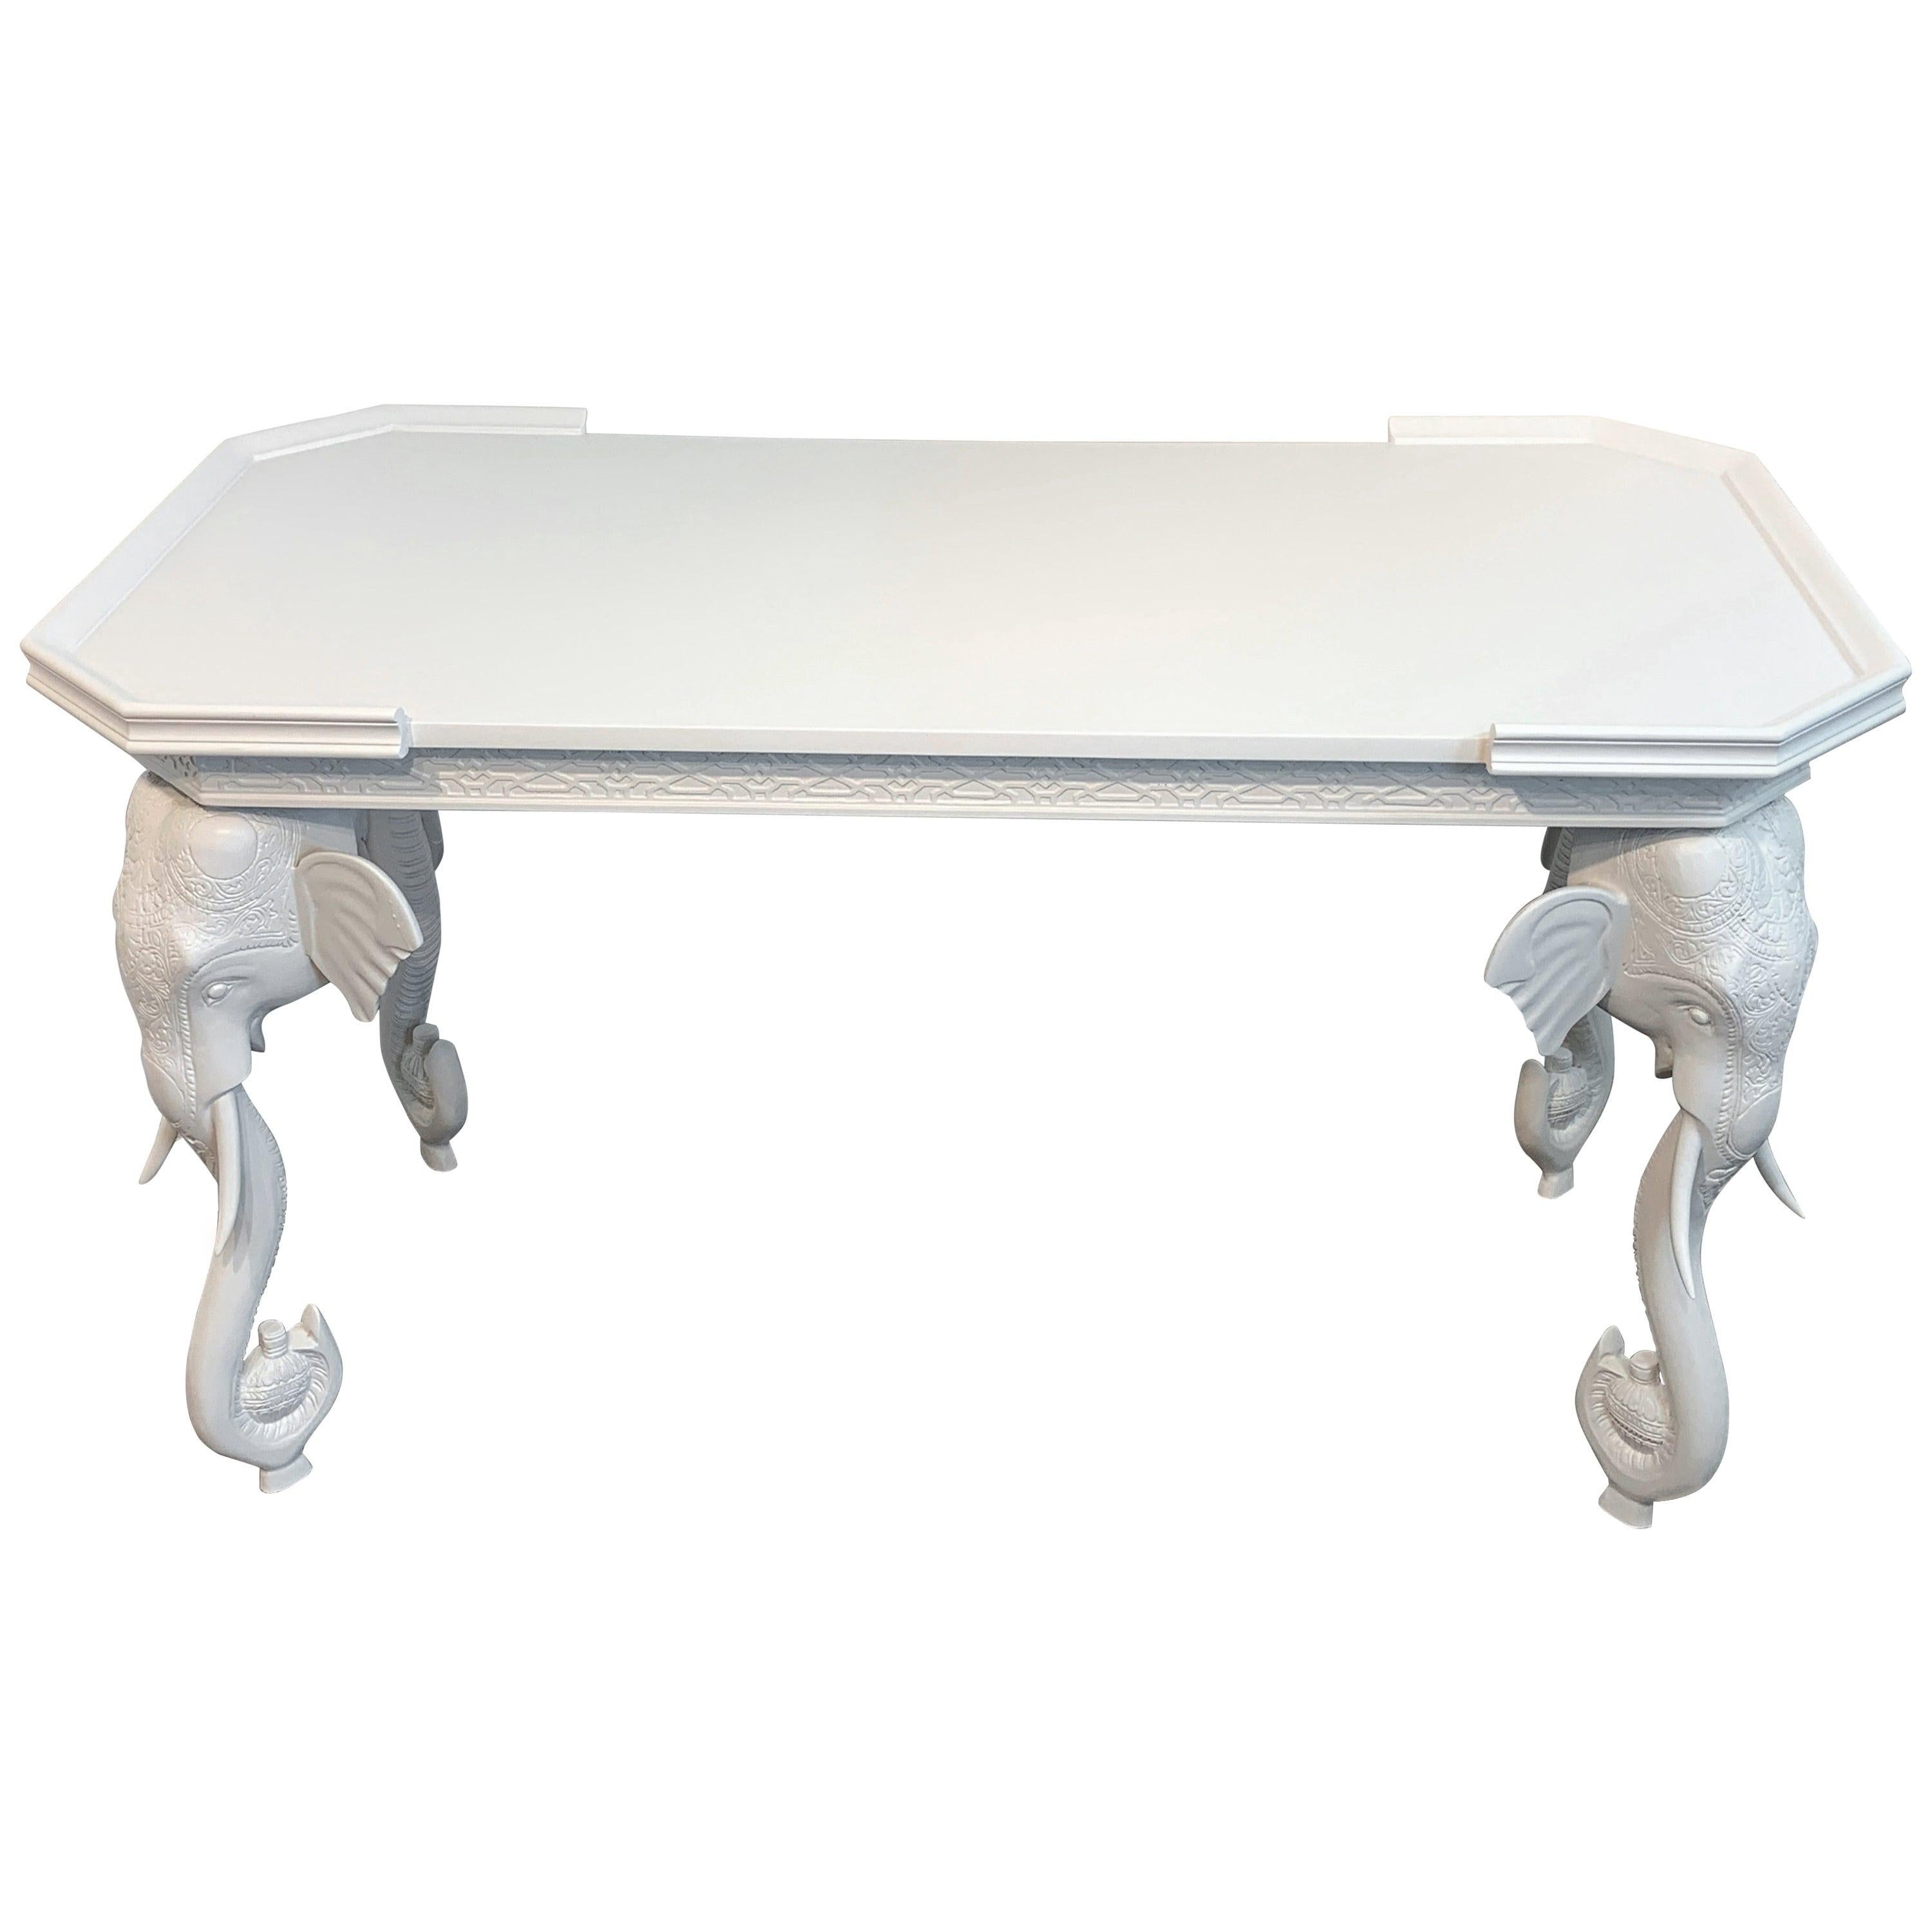 White Lacquered Carved Elephant Motif Desk / Console by Gampel & Stoll